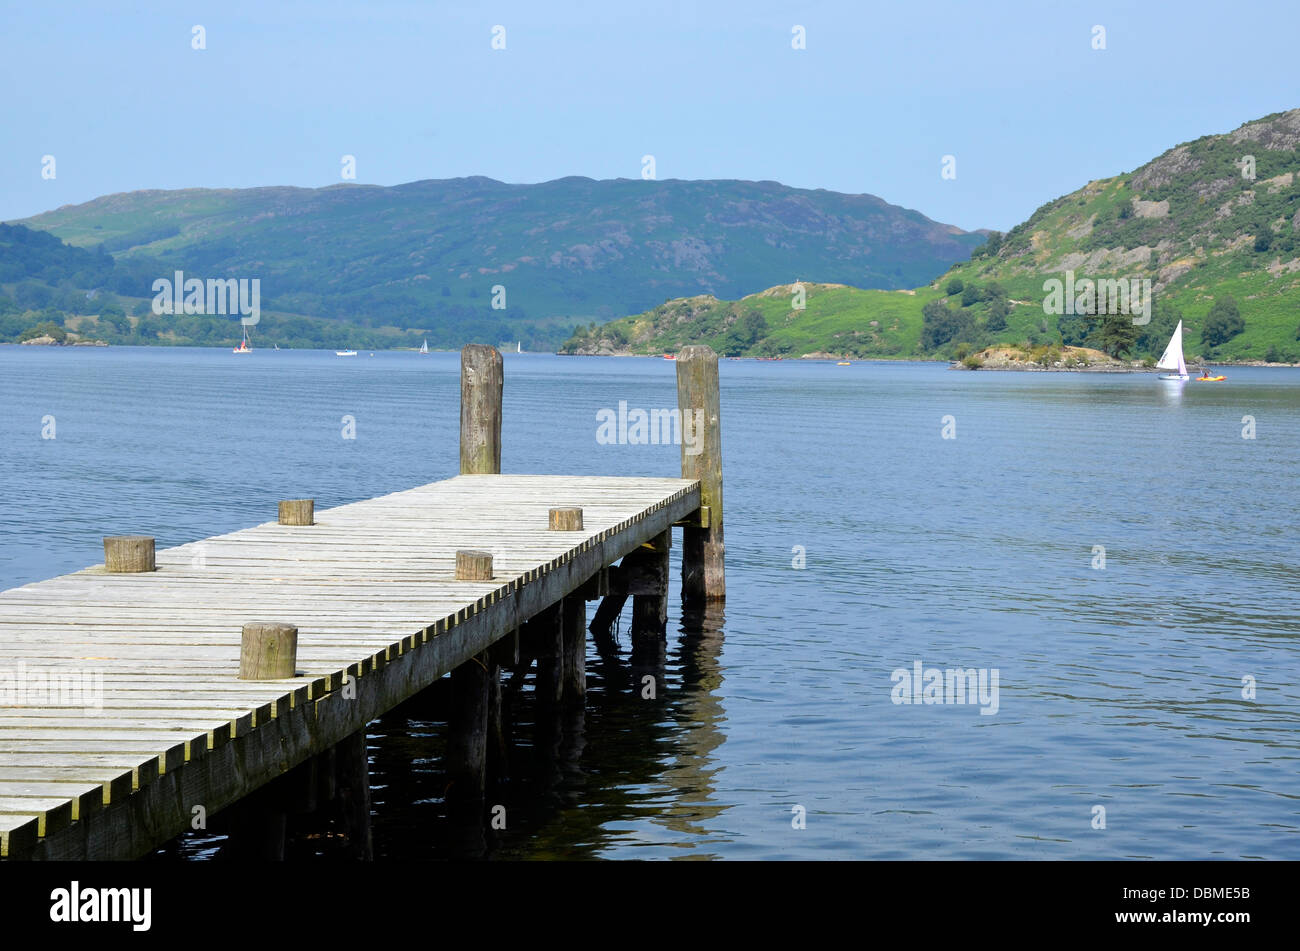 Timber jetty or pier at Gelnridding on the shores of Ullswater, in the Lake District Stock Photo